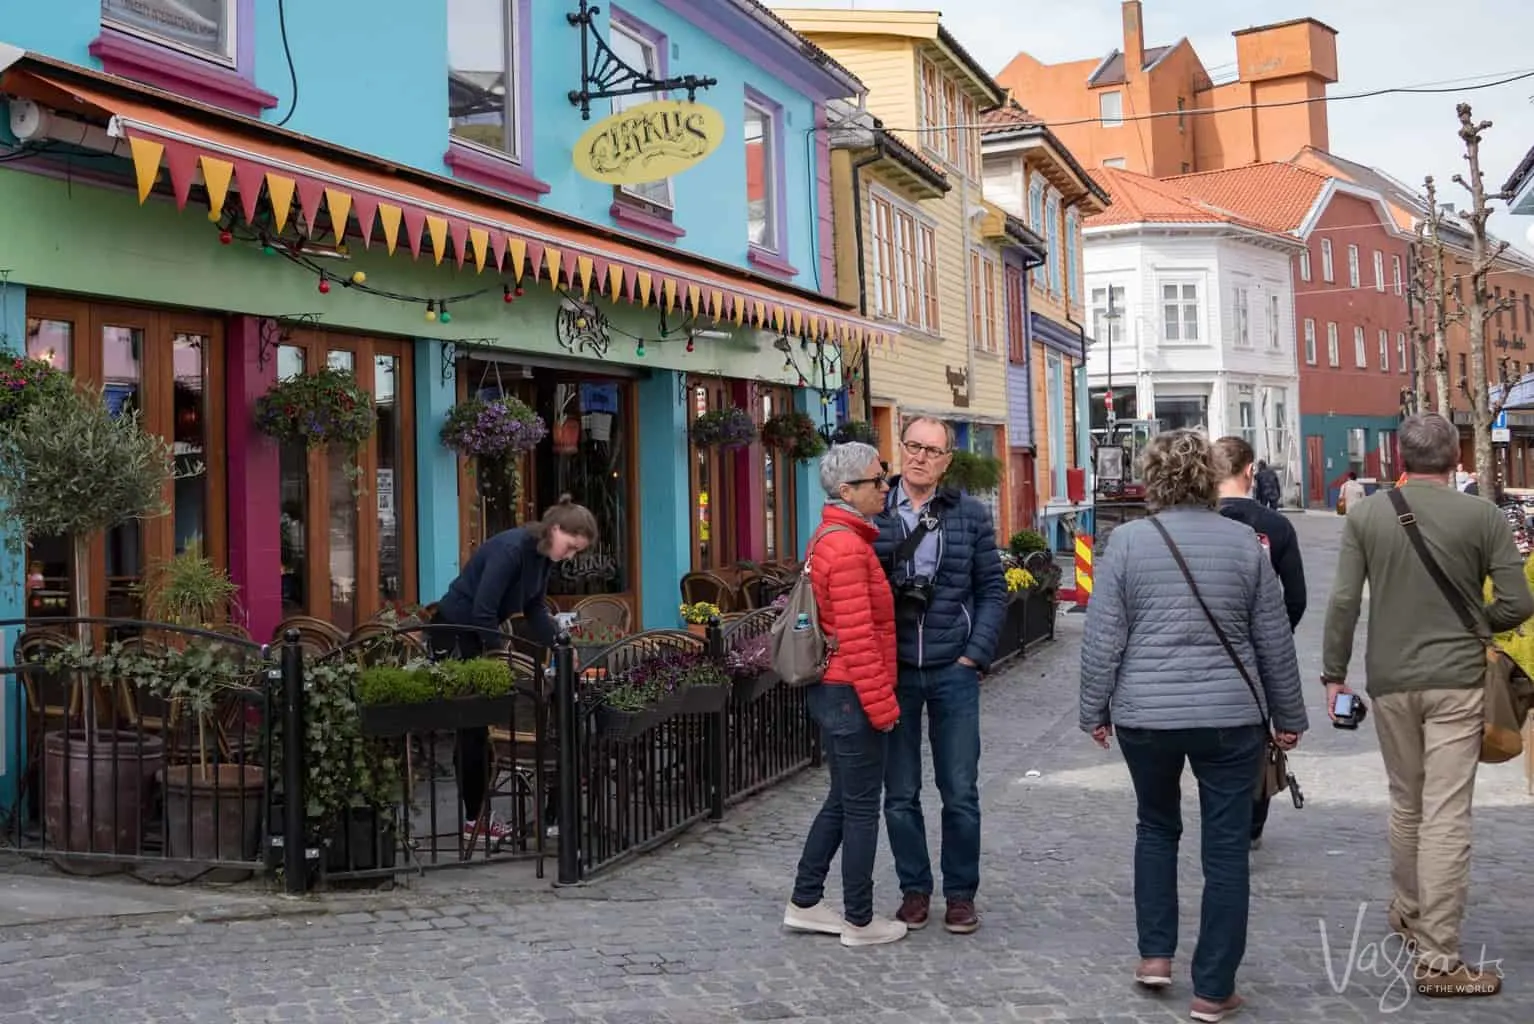 Viking river cruise packing list and cruise packing tips. Smart casual dress is best for day wear on a cruise. Just make sure your clothing and footwear are comfortable like these people on a cruise excursion in Norway.